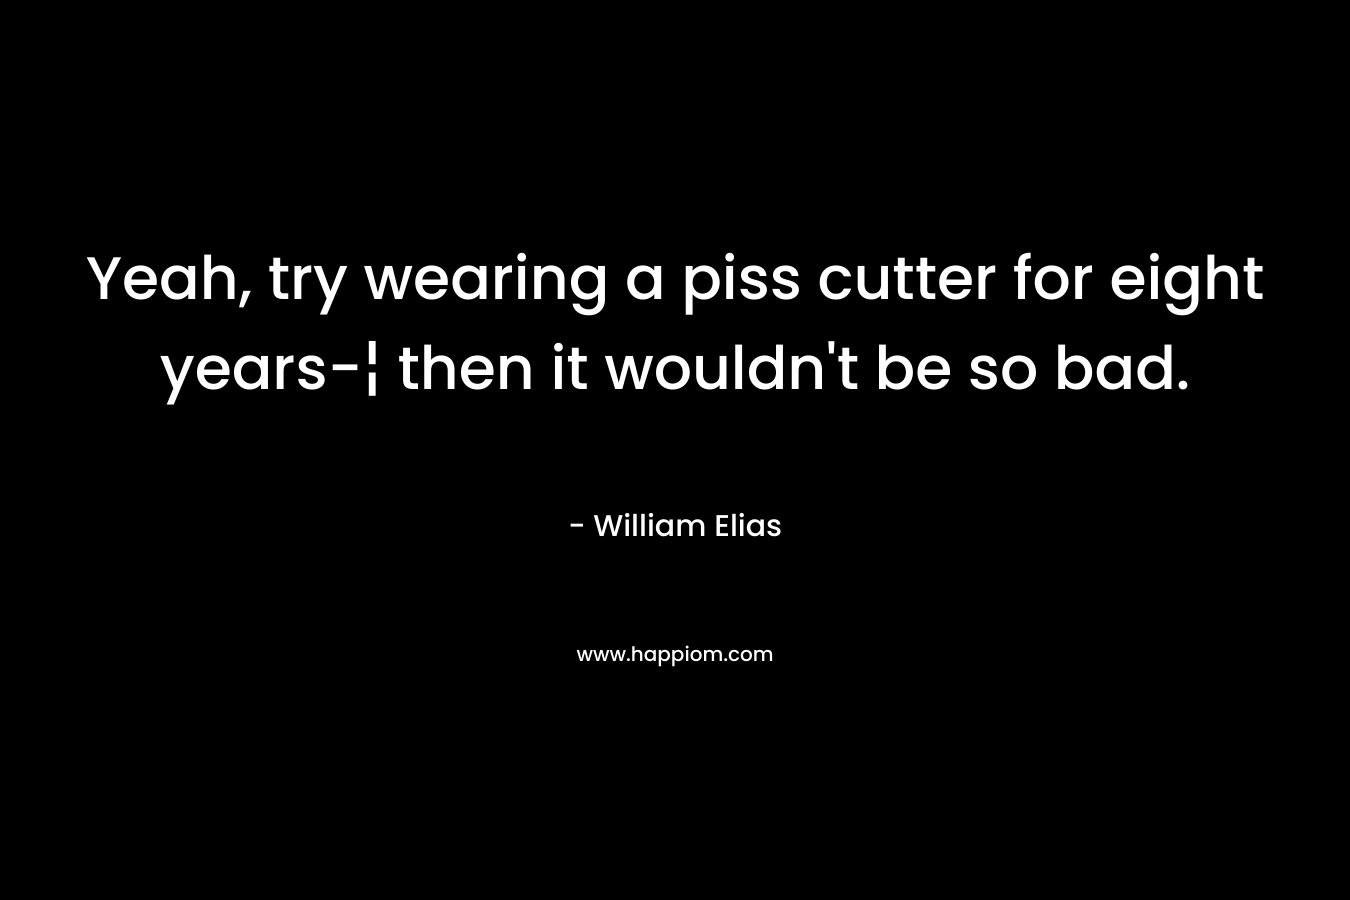 Yeah, try wearing a piss cutter for eight years-¦ then it wouldn’t be so bad. – William Elias